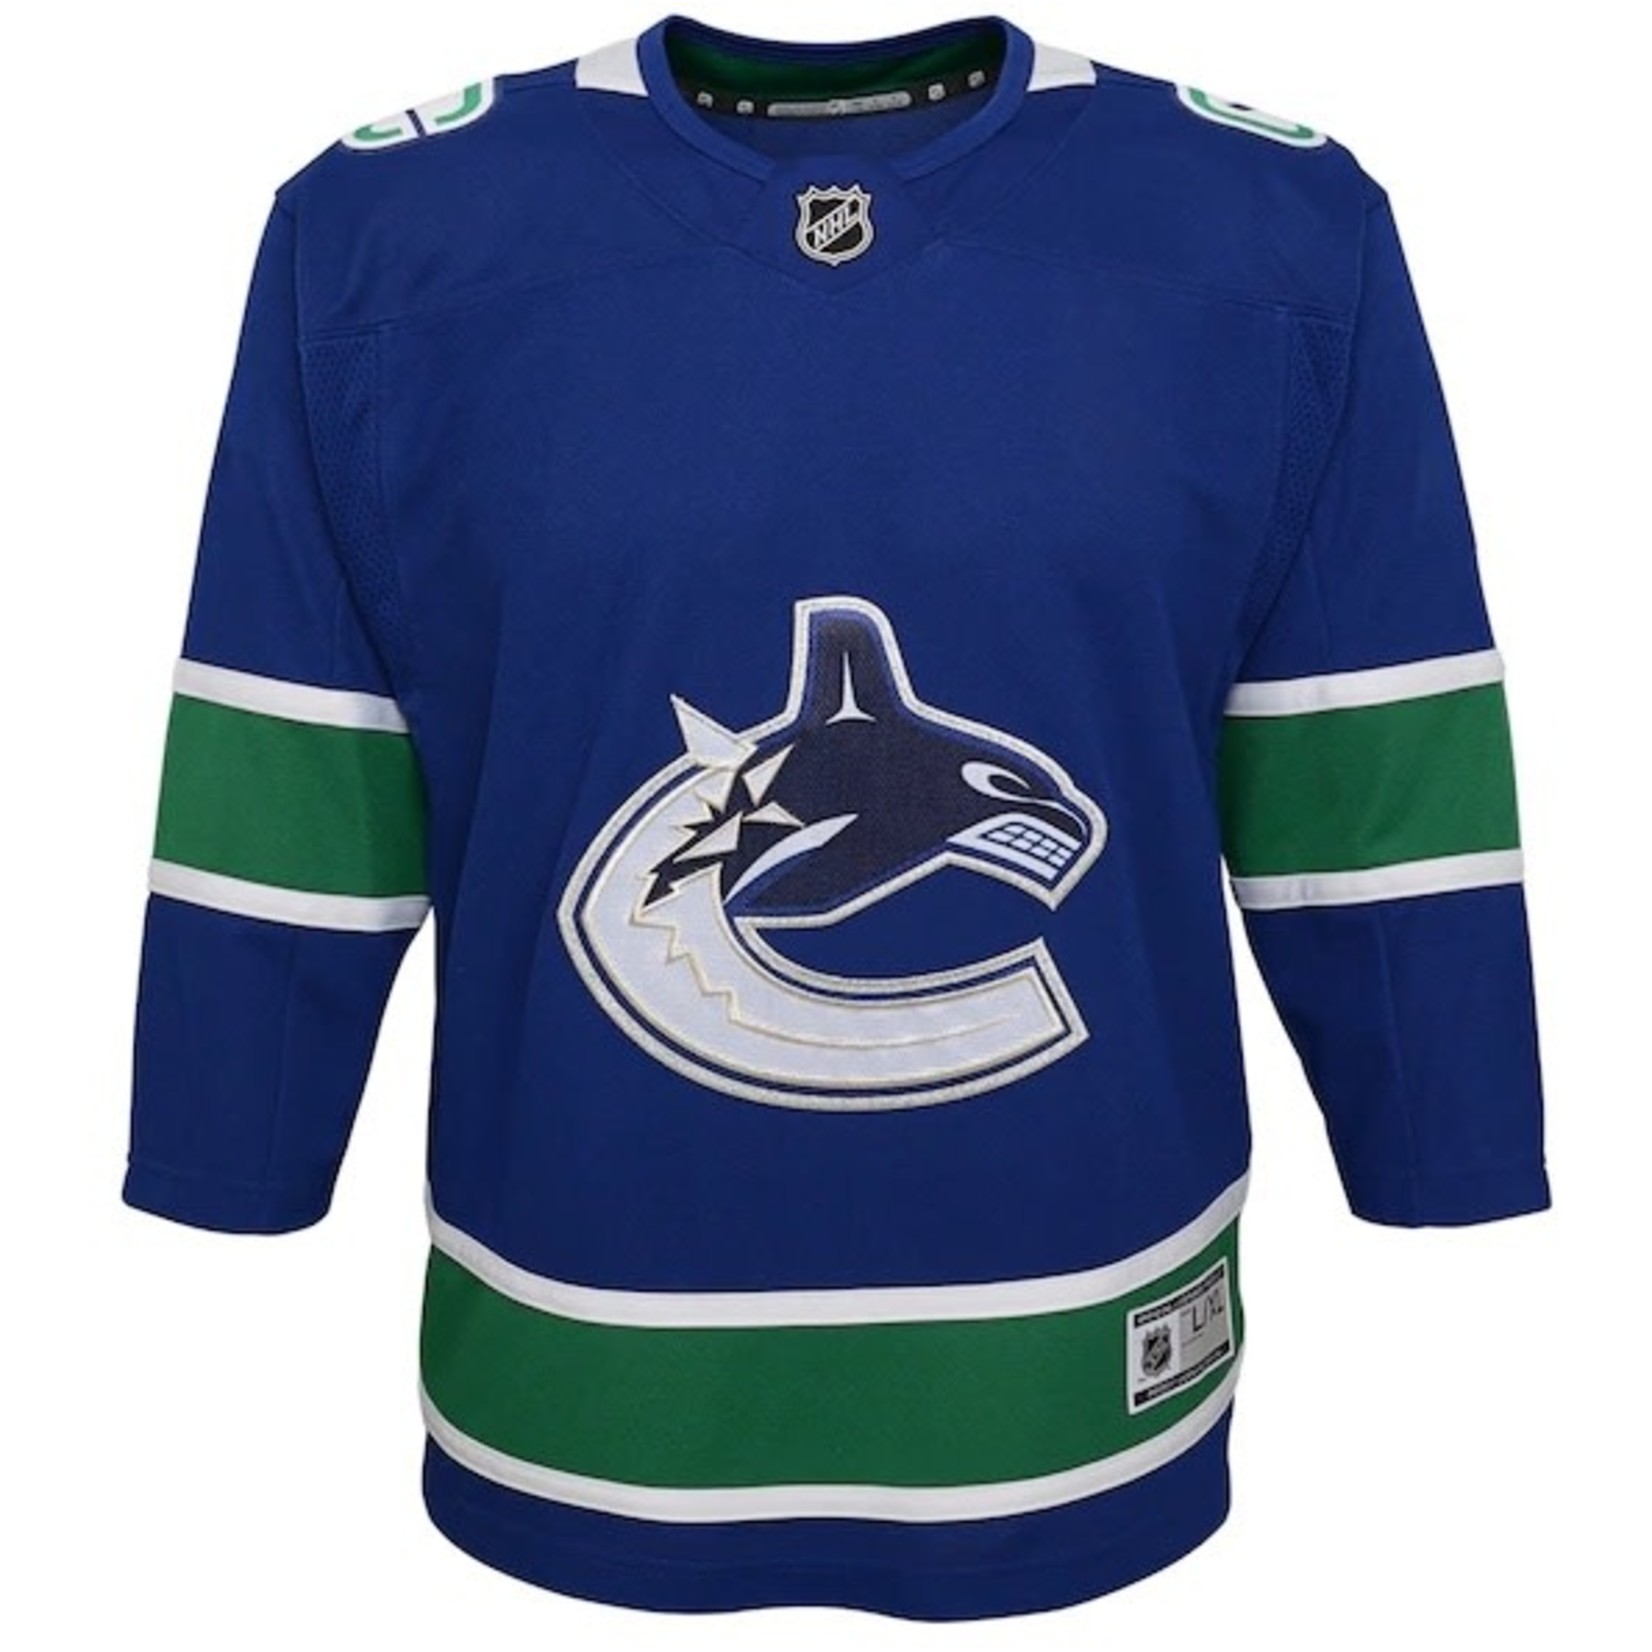 Outerstuff Outerstuff Hockey Jersey, Replica, Home, NHL, Toddler, Vancouver Canucks 2-4T